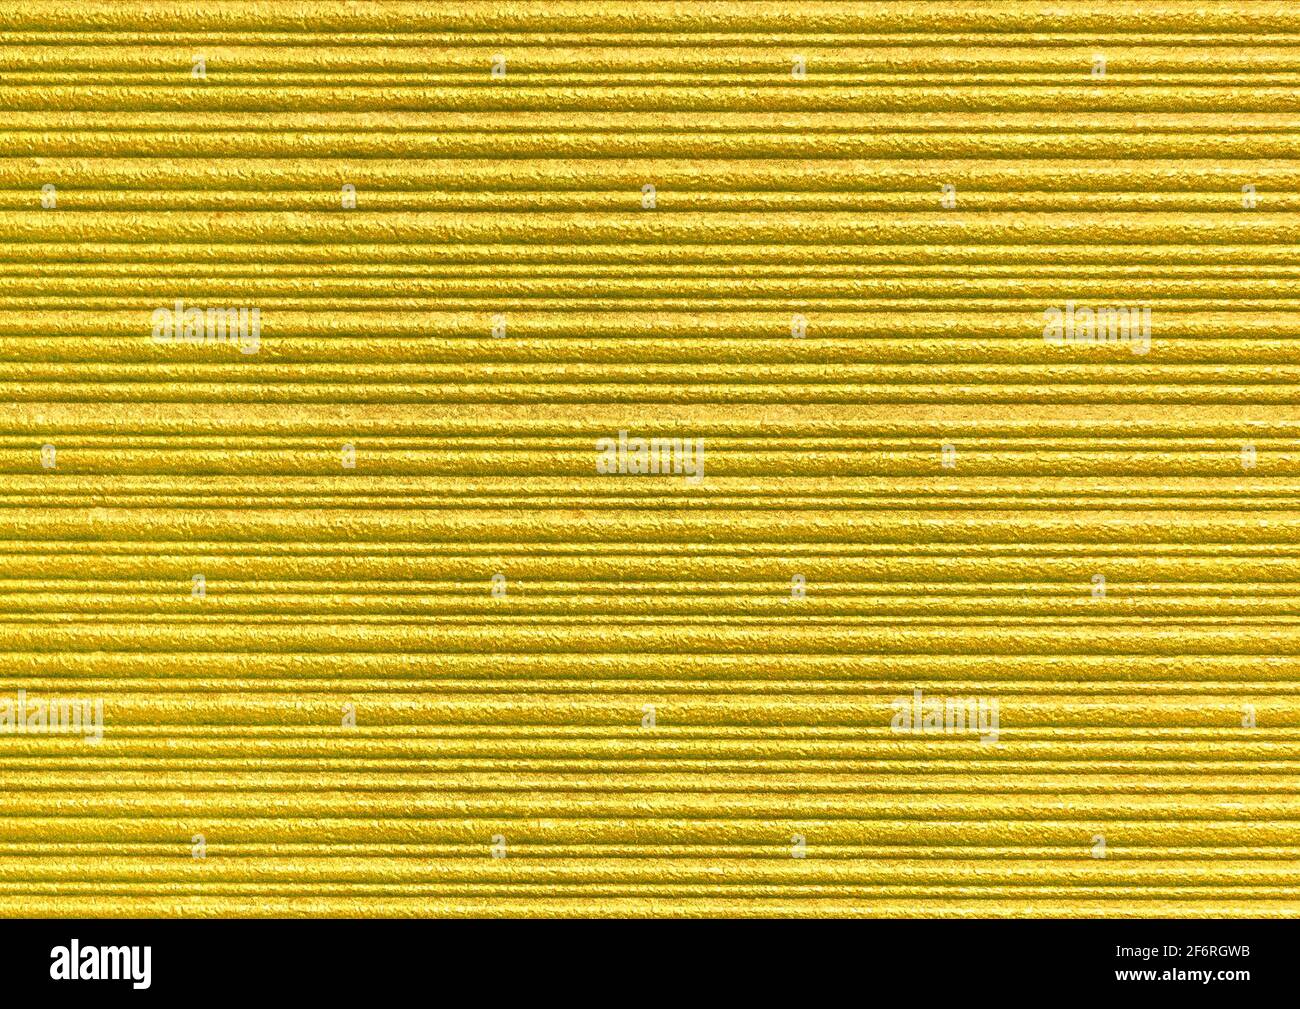 Yellow abstract striped pattern wallpaper background, gold paper texture with horizontal lines. Stock Photo